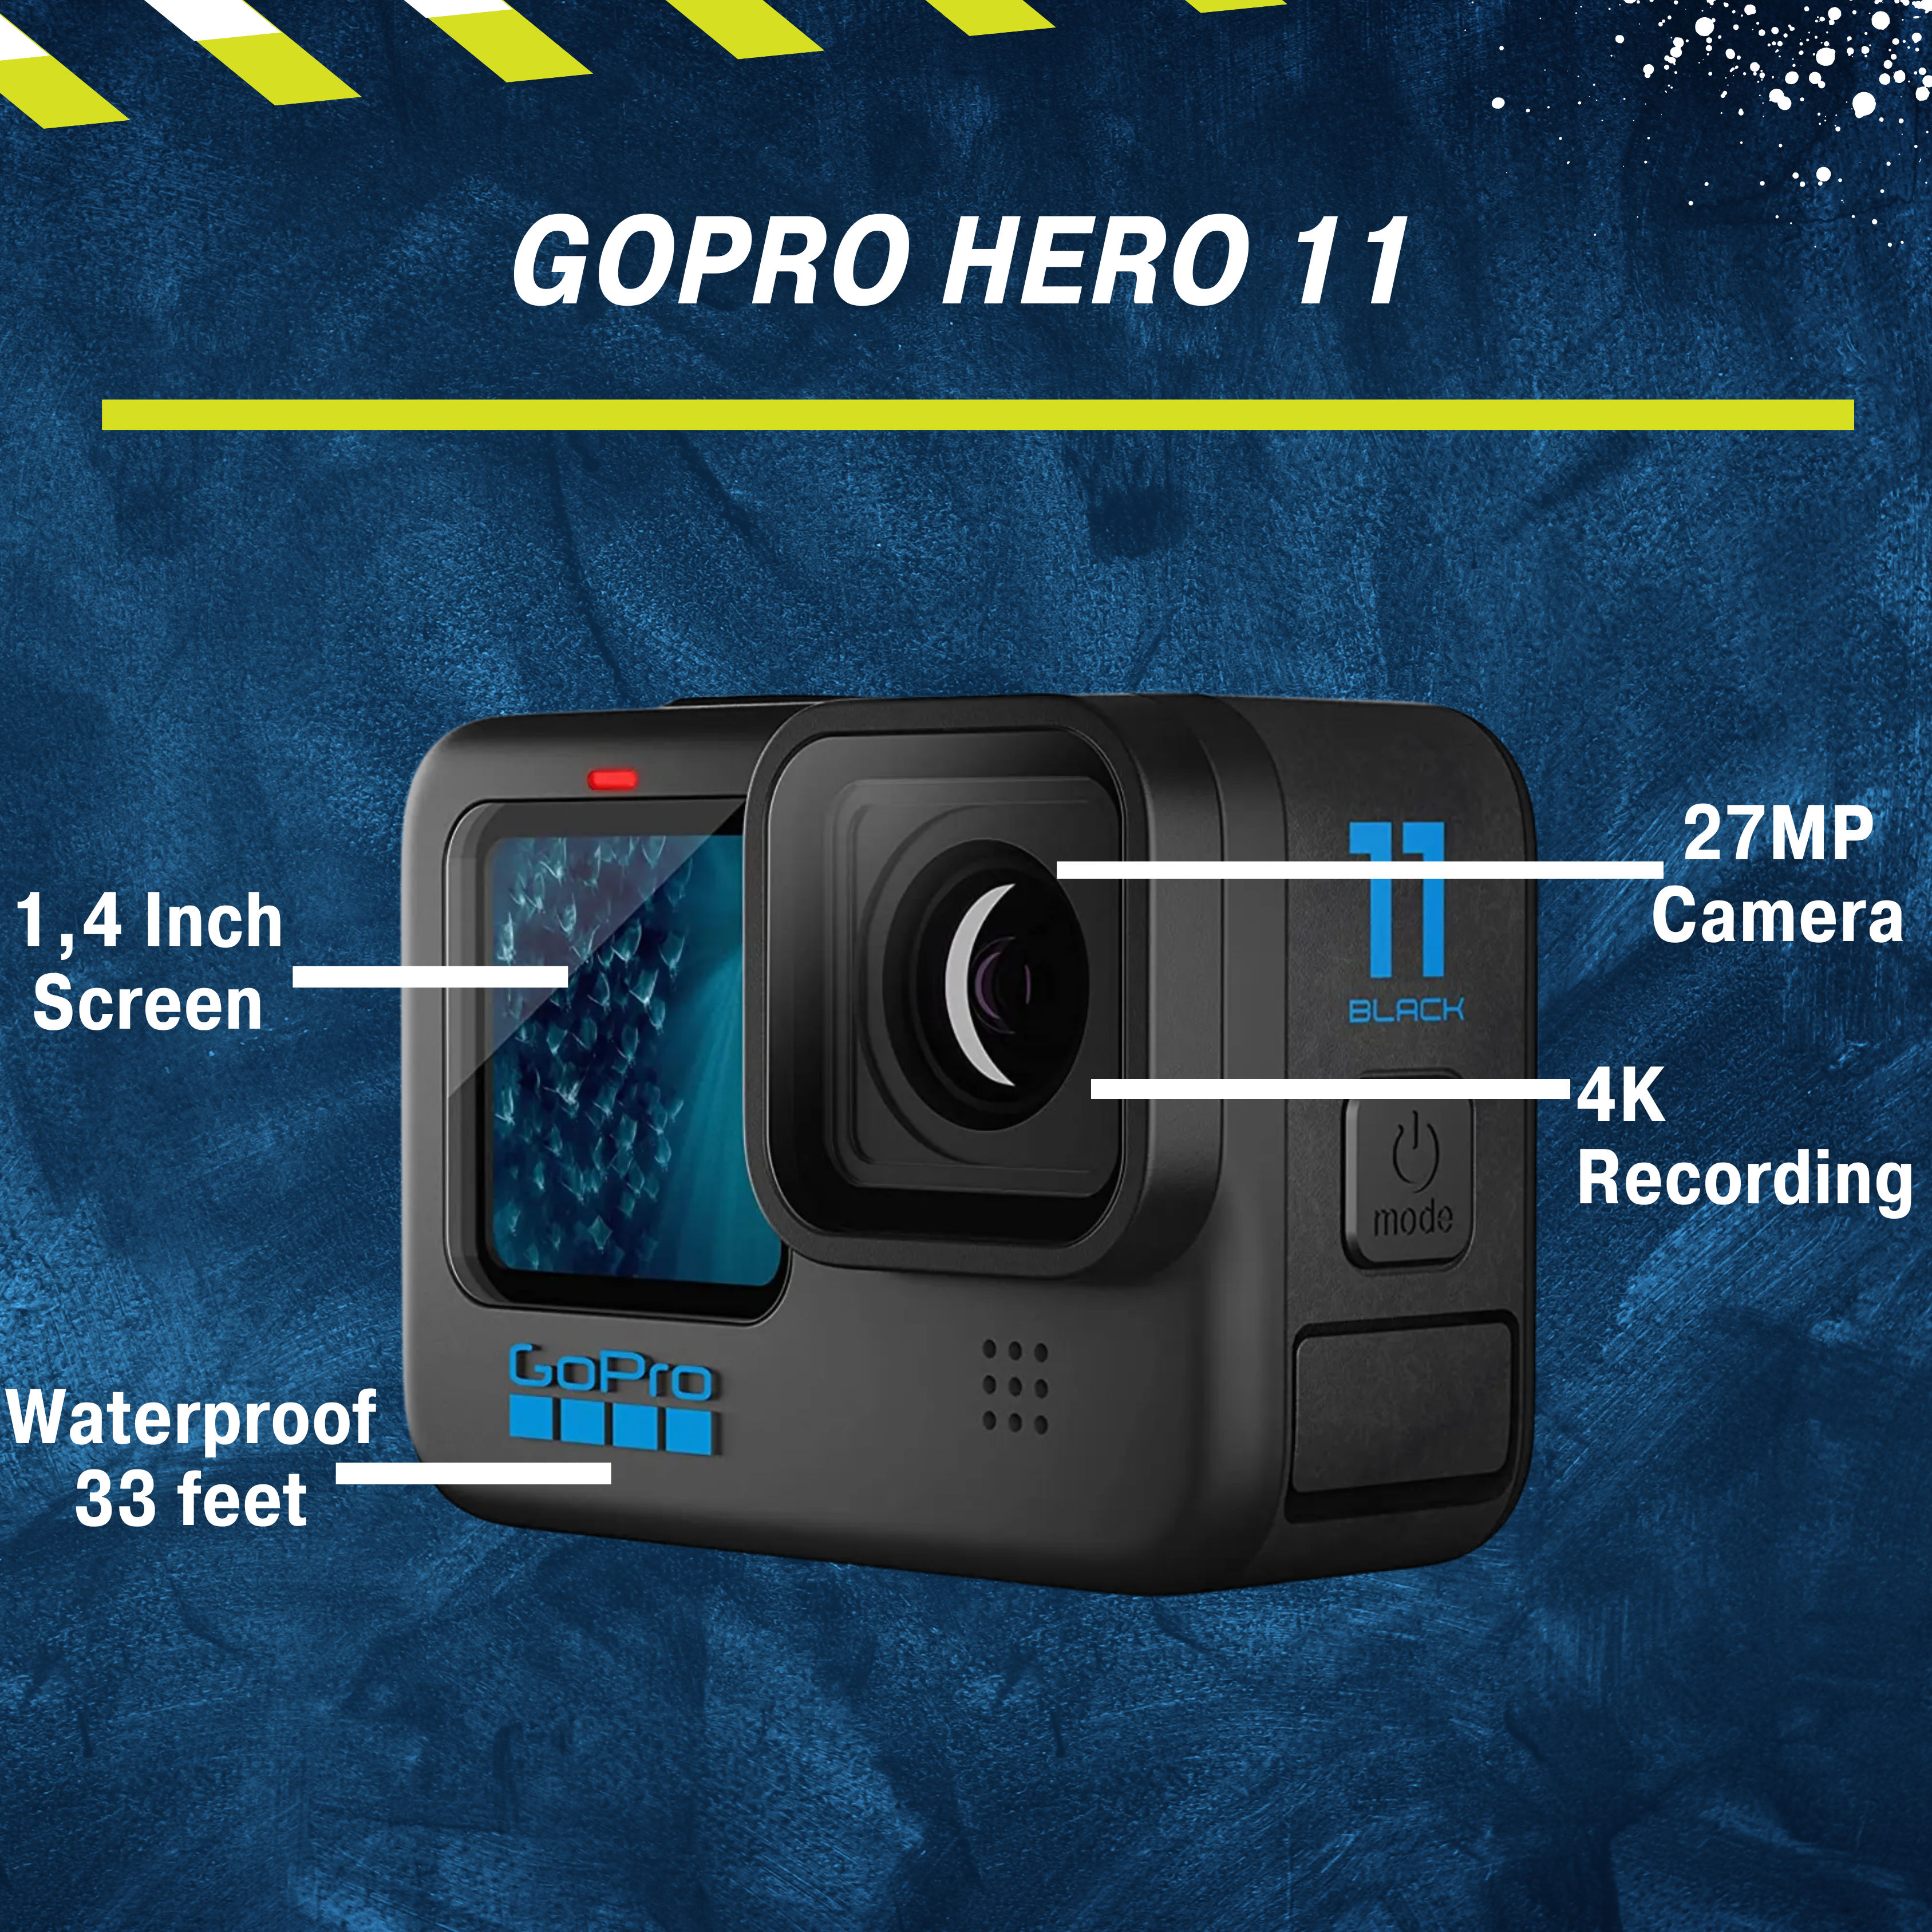 These are product images of GoPro Hero 11 on rent by SharePal.